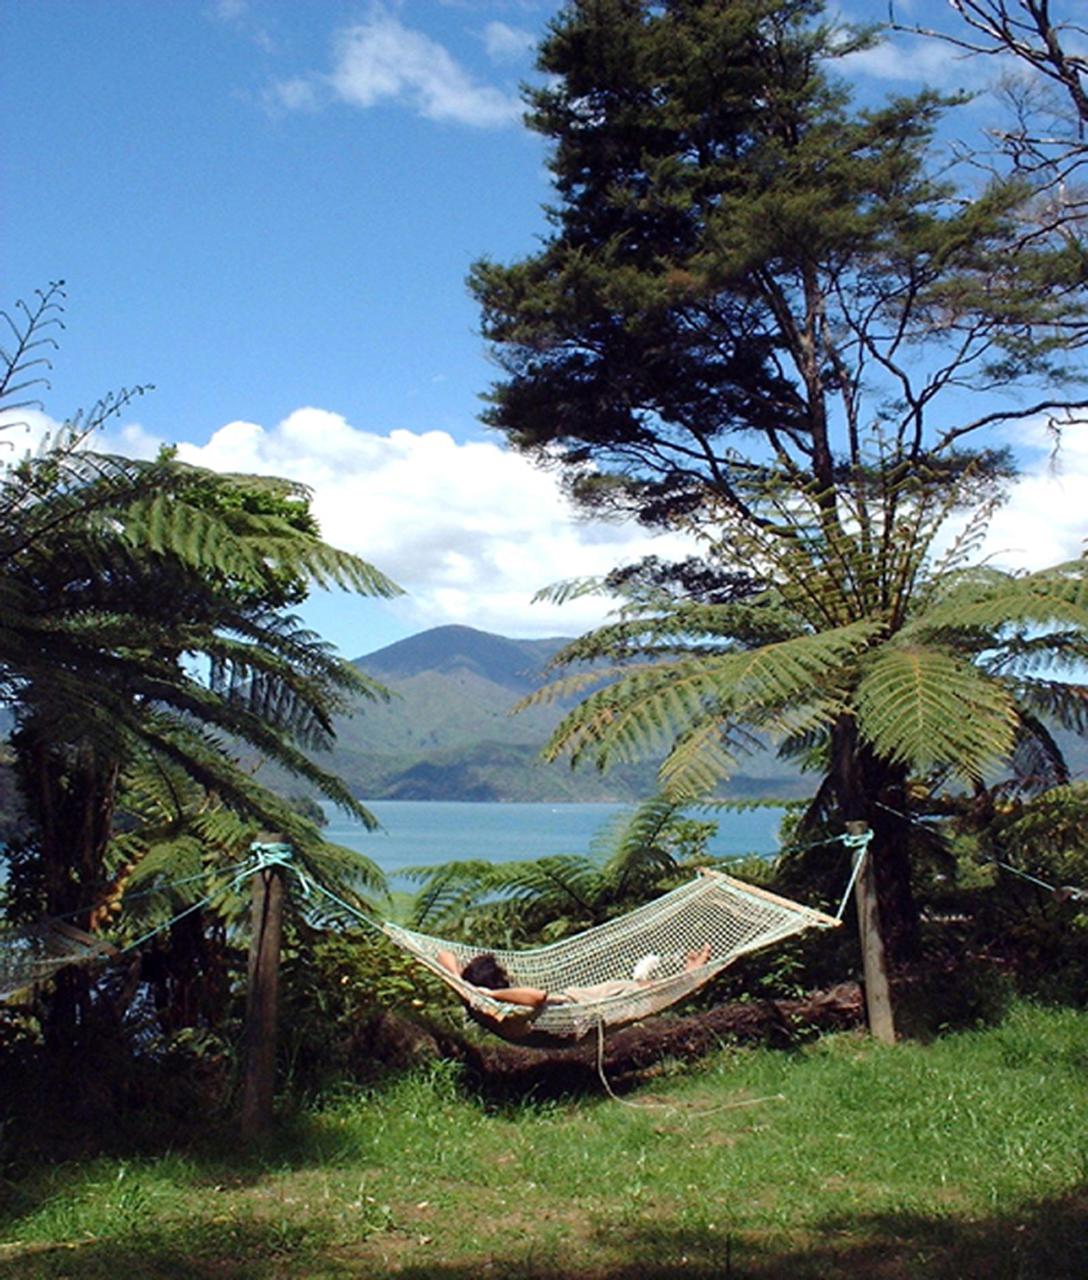 z. Queen Charlotte Track - 5 Day Deluxe Independent Walk - Furneaux Lodge, Mahana Lodge and 2 nights Lochmara Lodge 